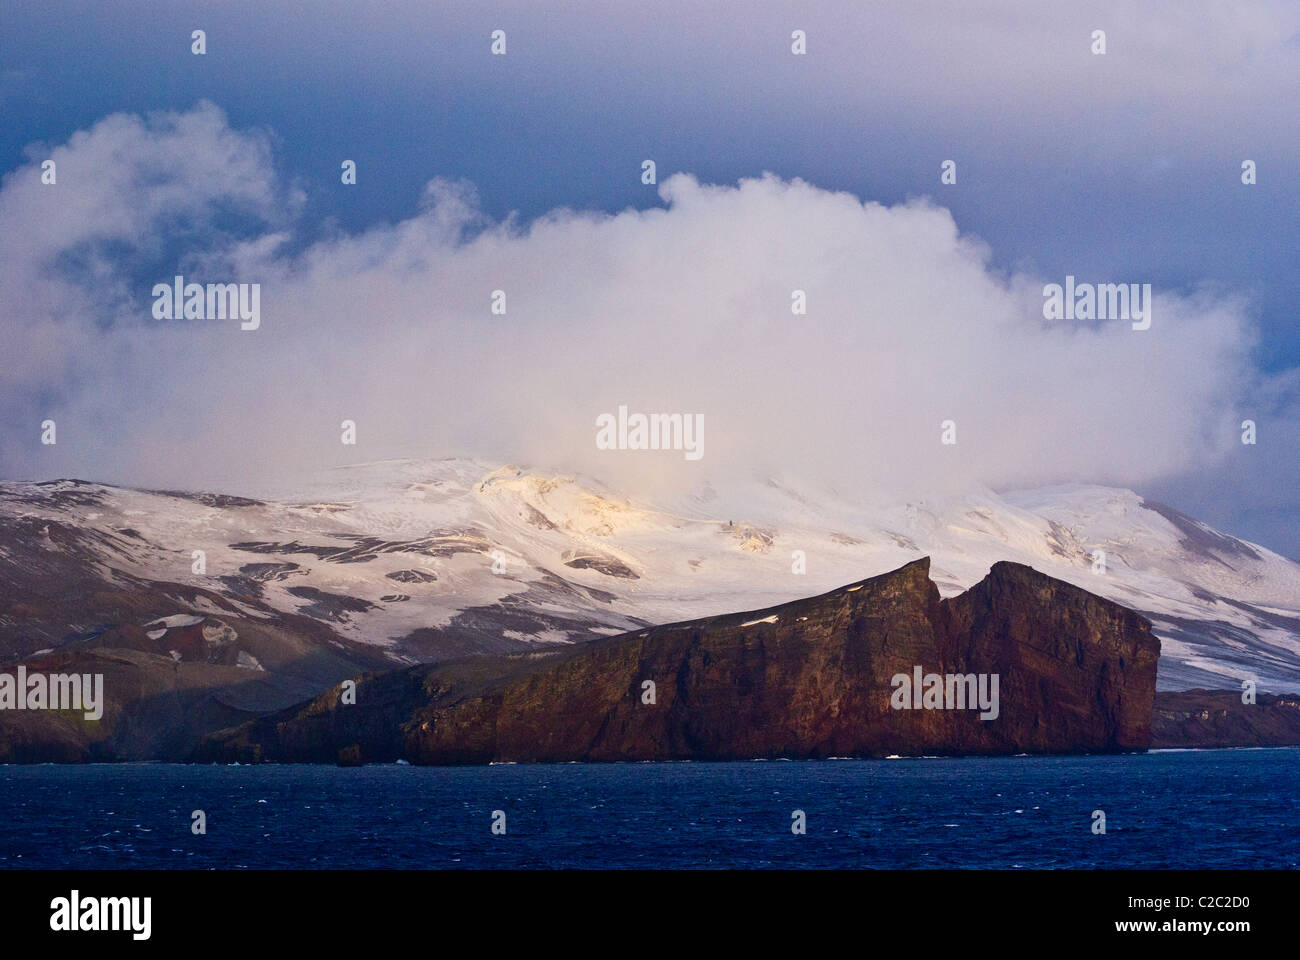 Rugged snow and ice encrusted mountain surrounding a volcanic caldera. Stock Photo